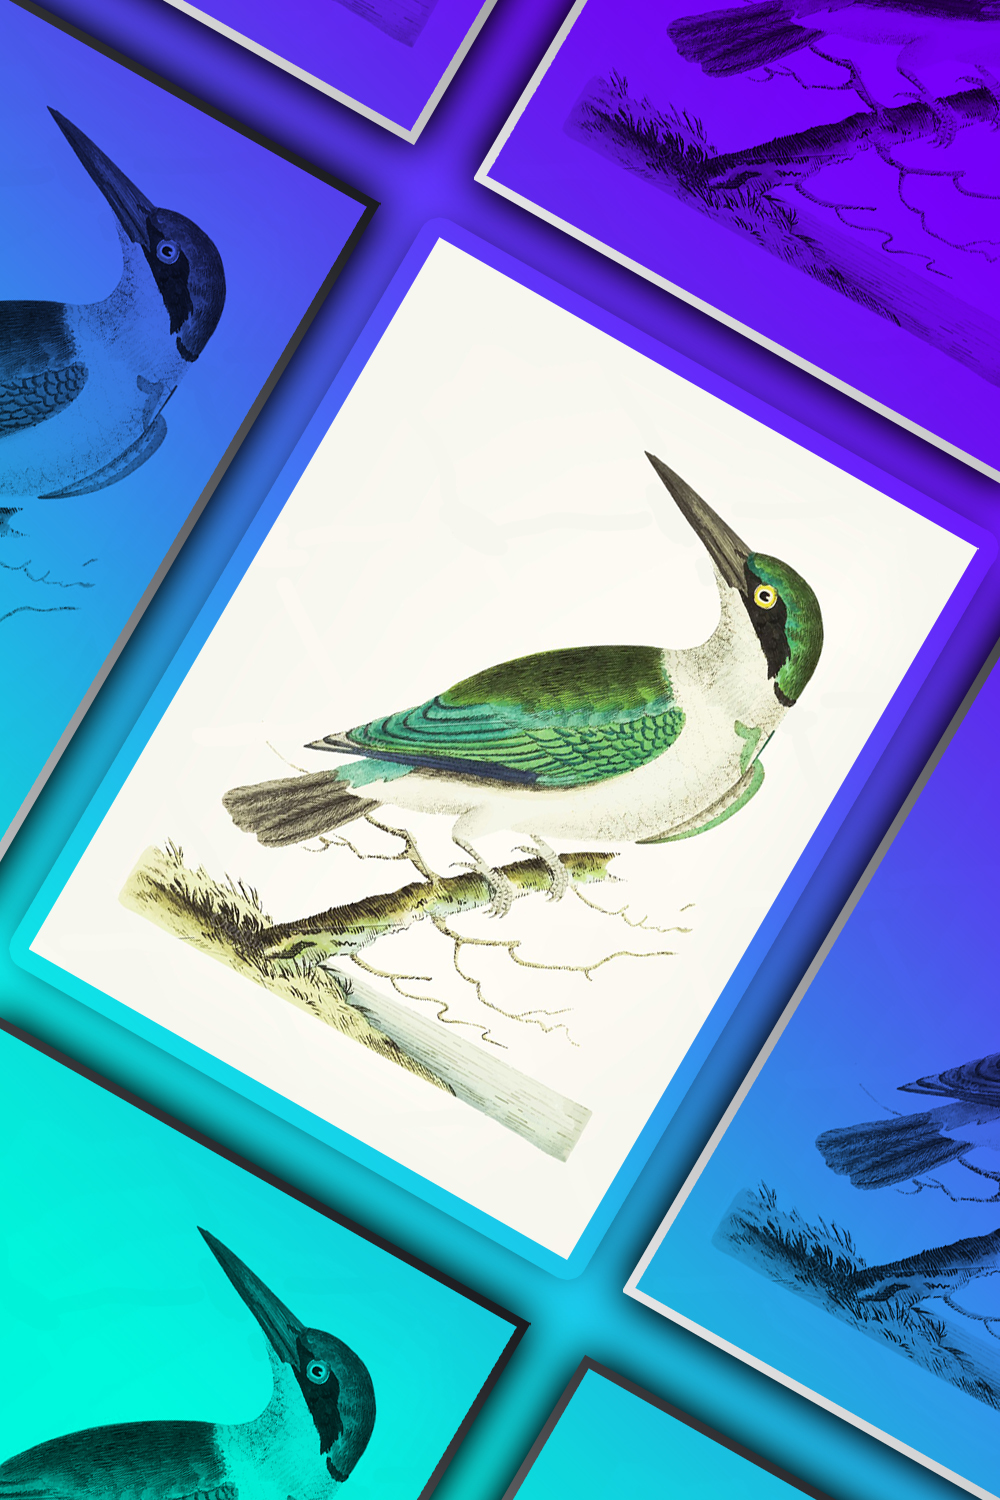 Illustrations drawing of green headed kingfisher of pinterest.